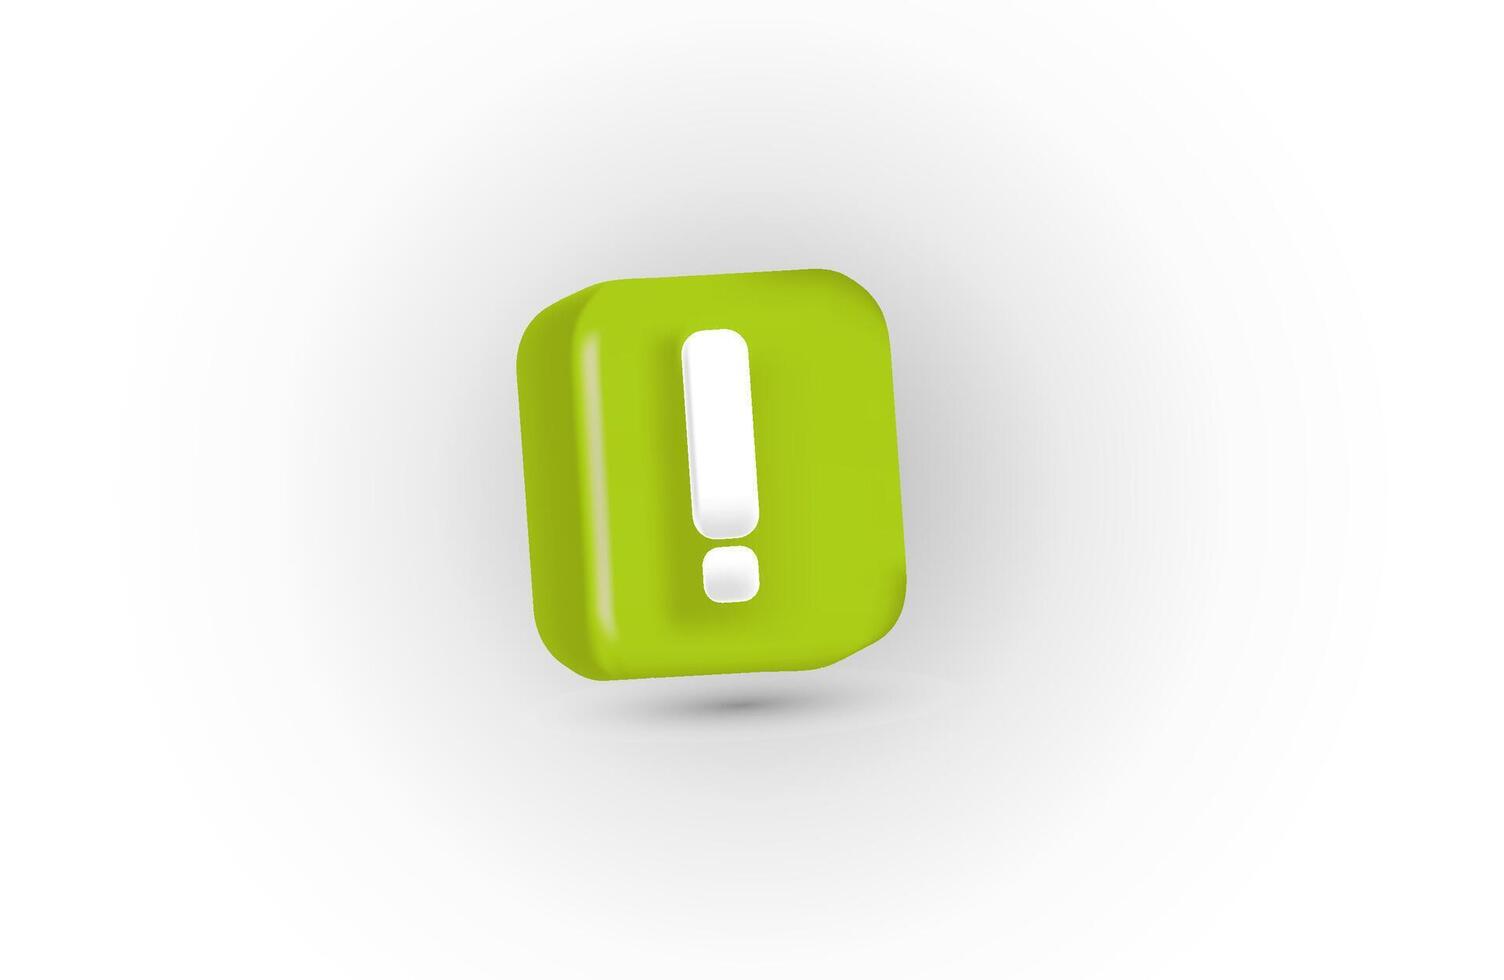 Green exclamation mark symbol and attention or caution sign icon on alert danger problem vector